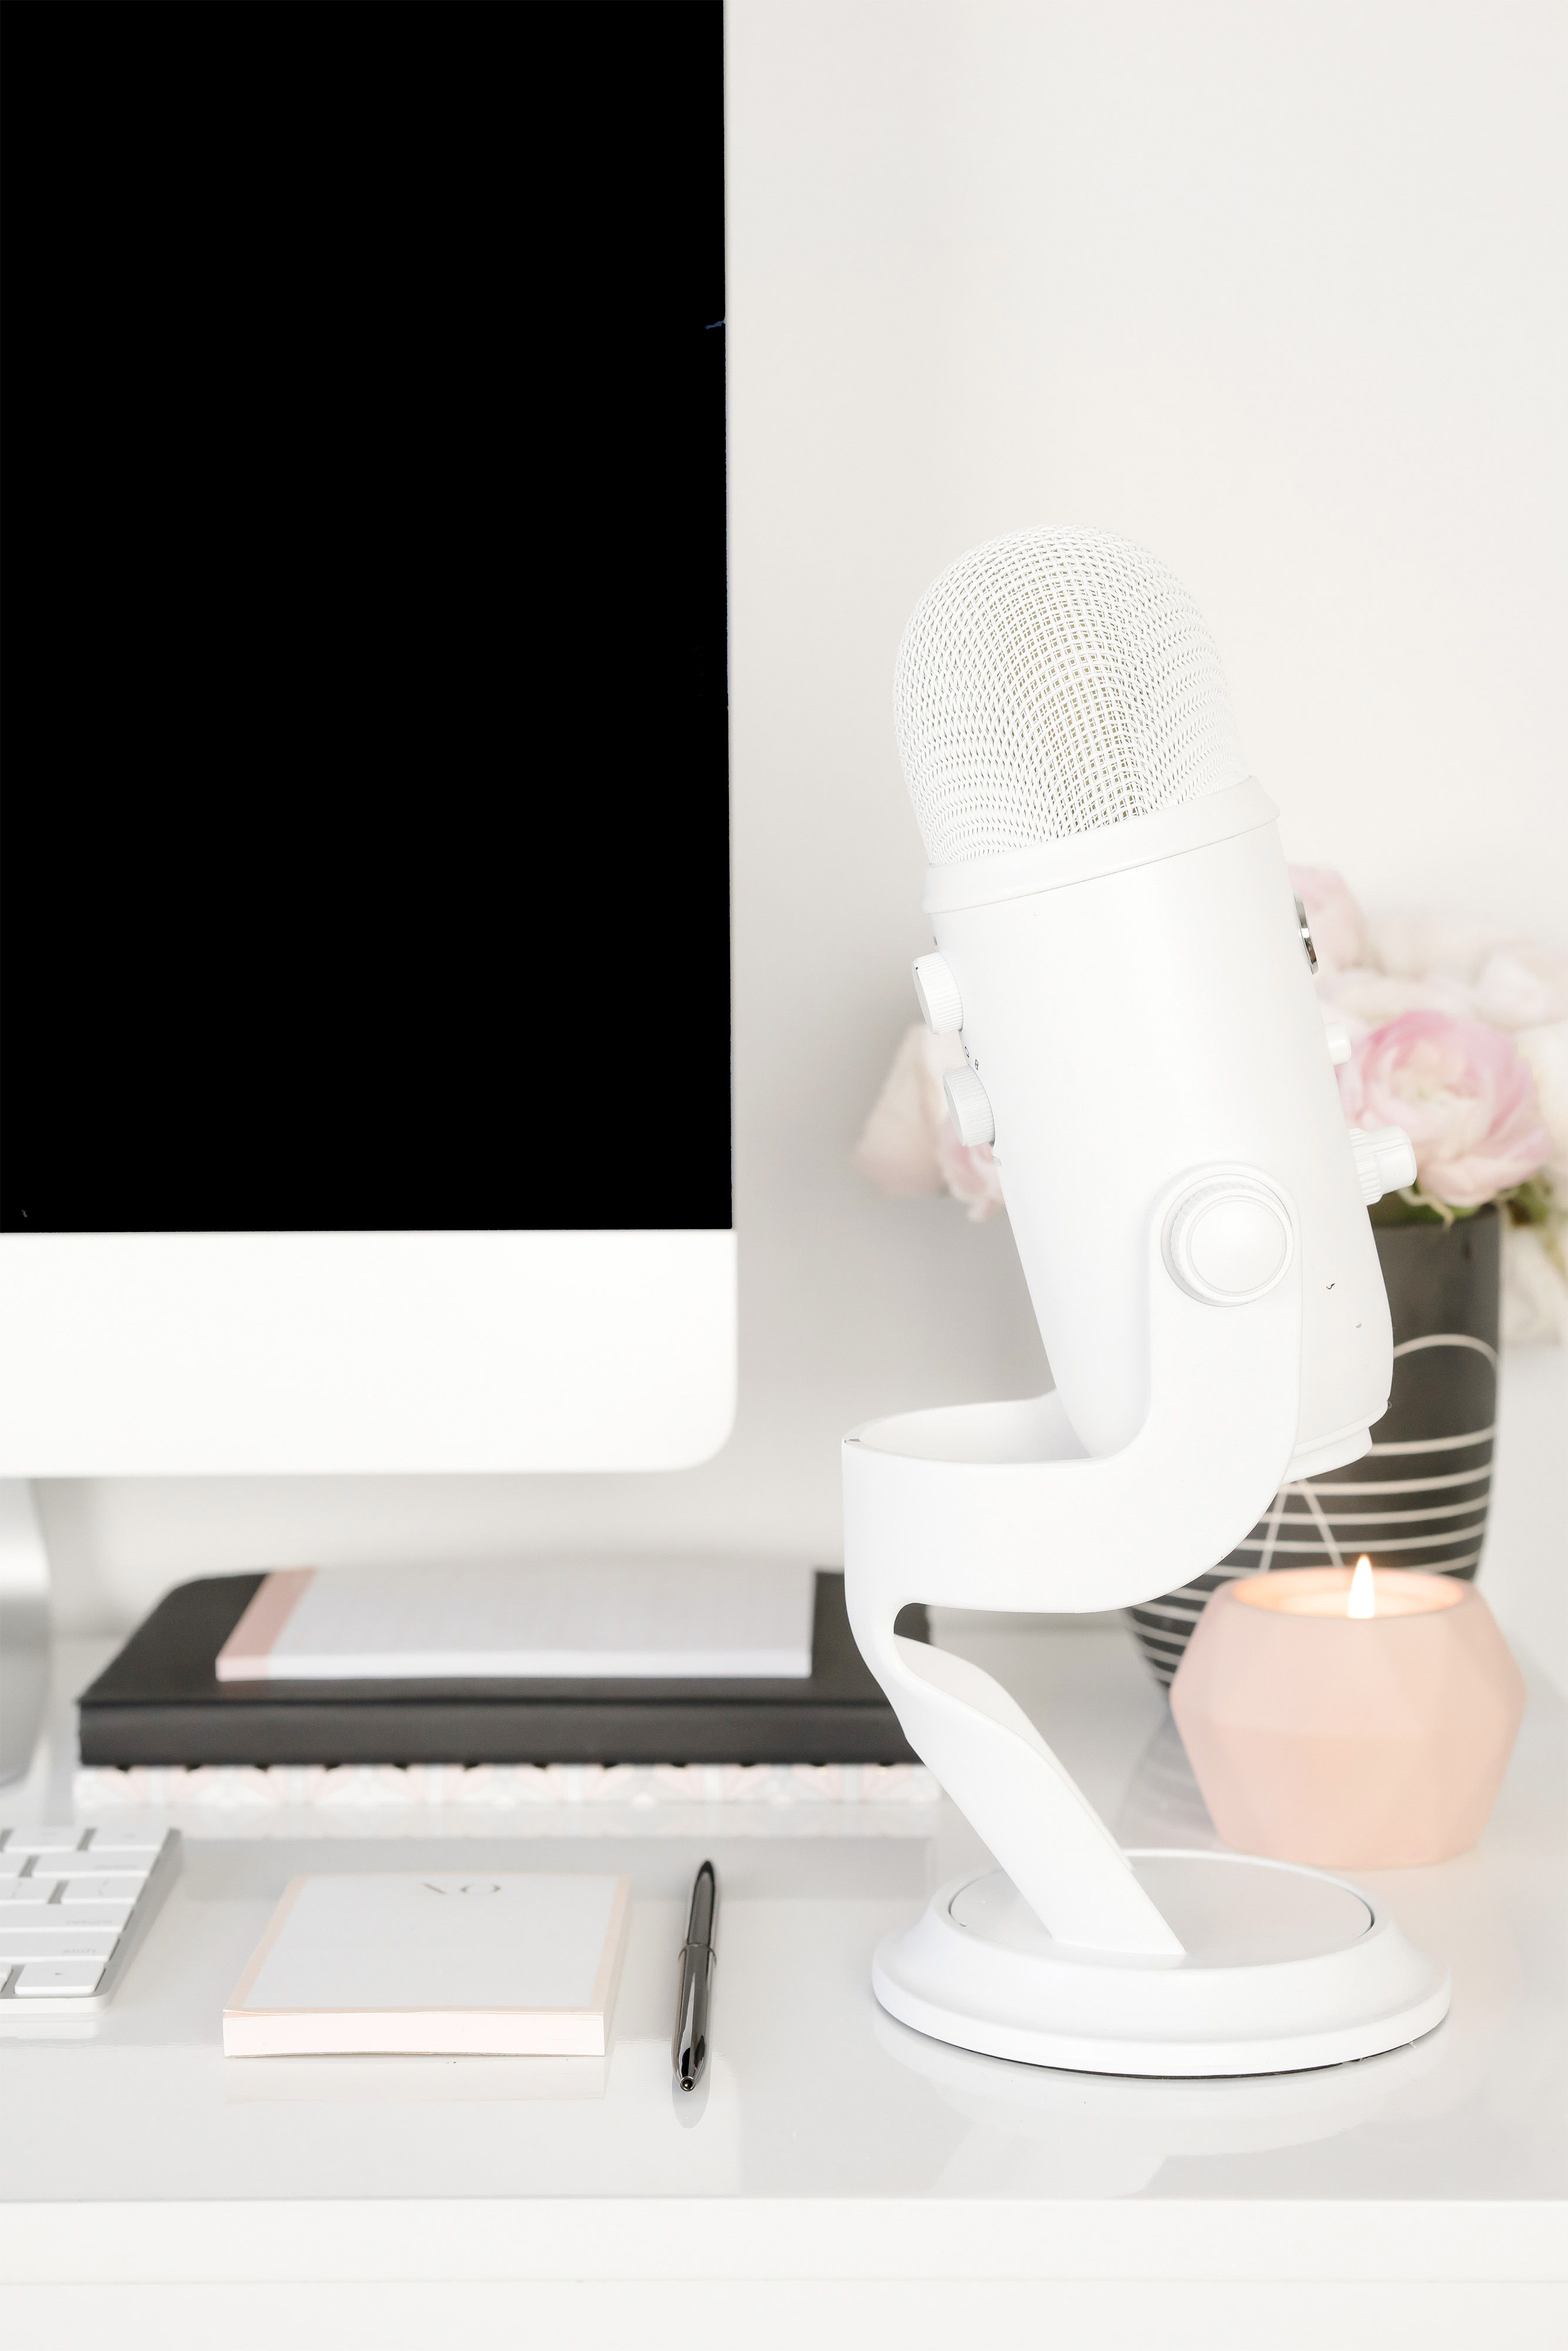 Blush Black and White Workspace with roses for Canva essentials online course the step-by-step program to guide you through all the essentials you need even with zero design skills